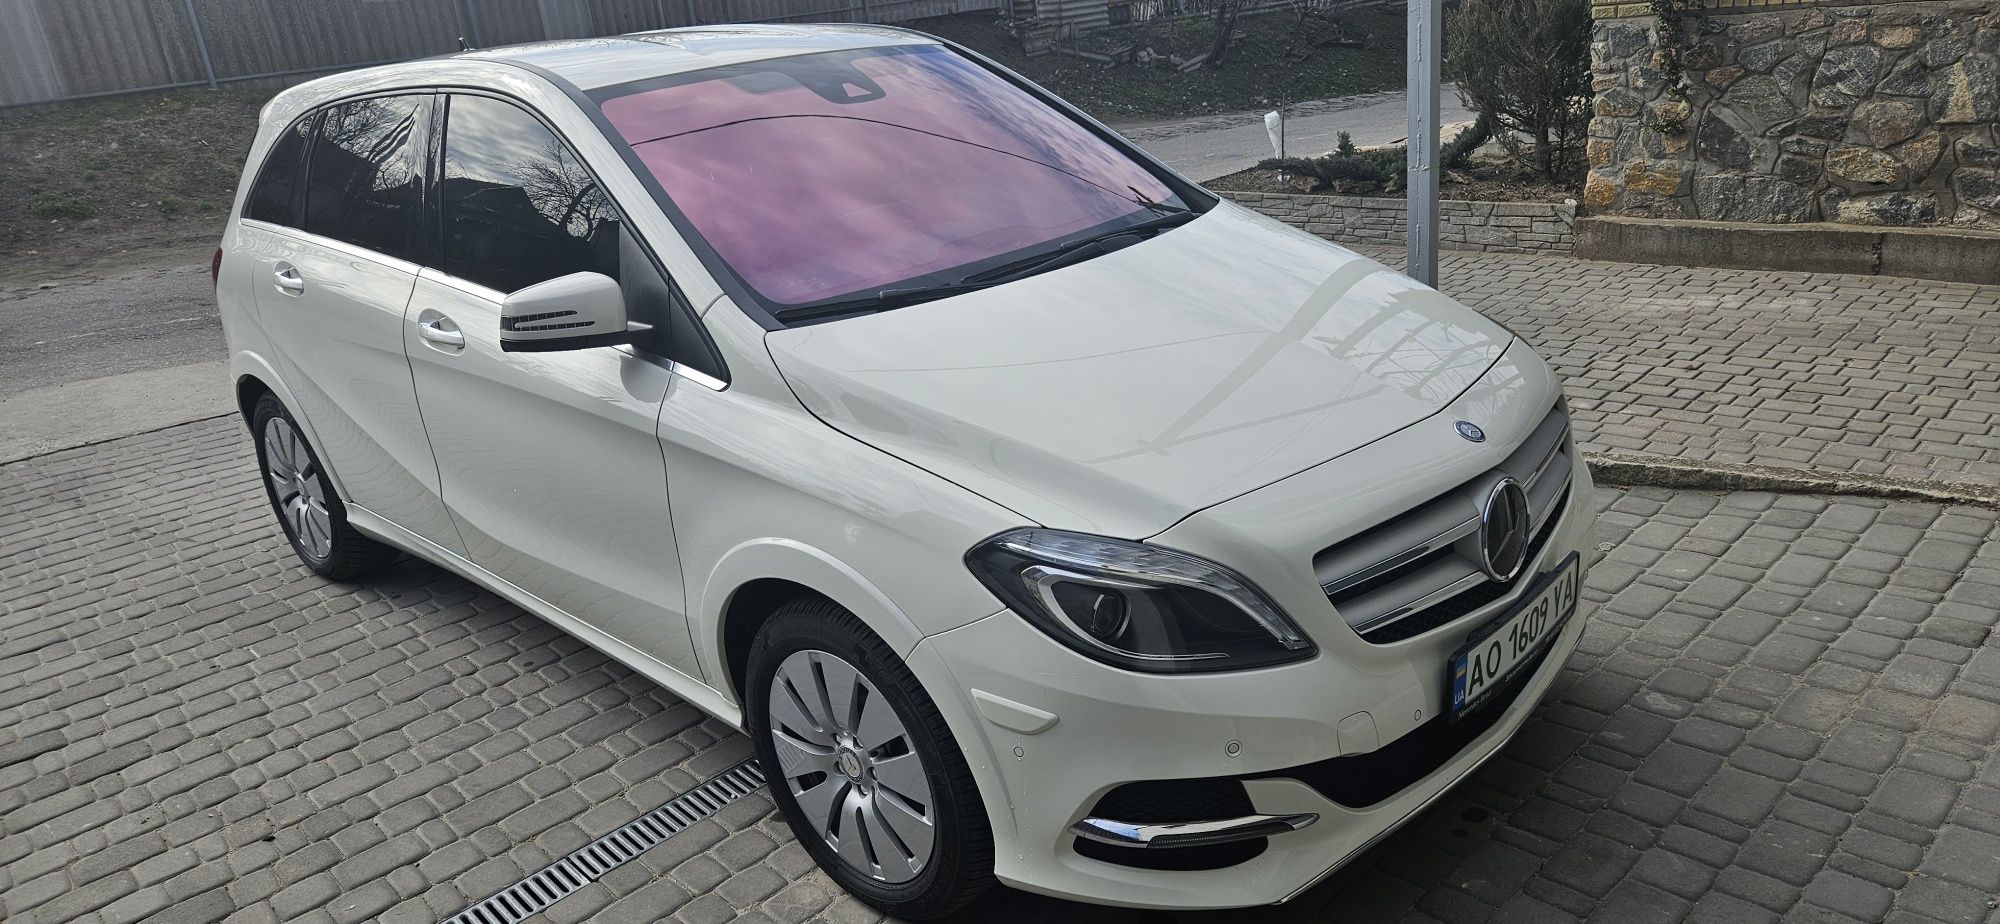 Mersedes B class W242 electric